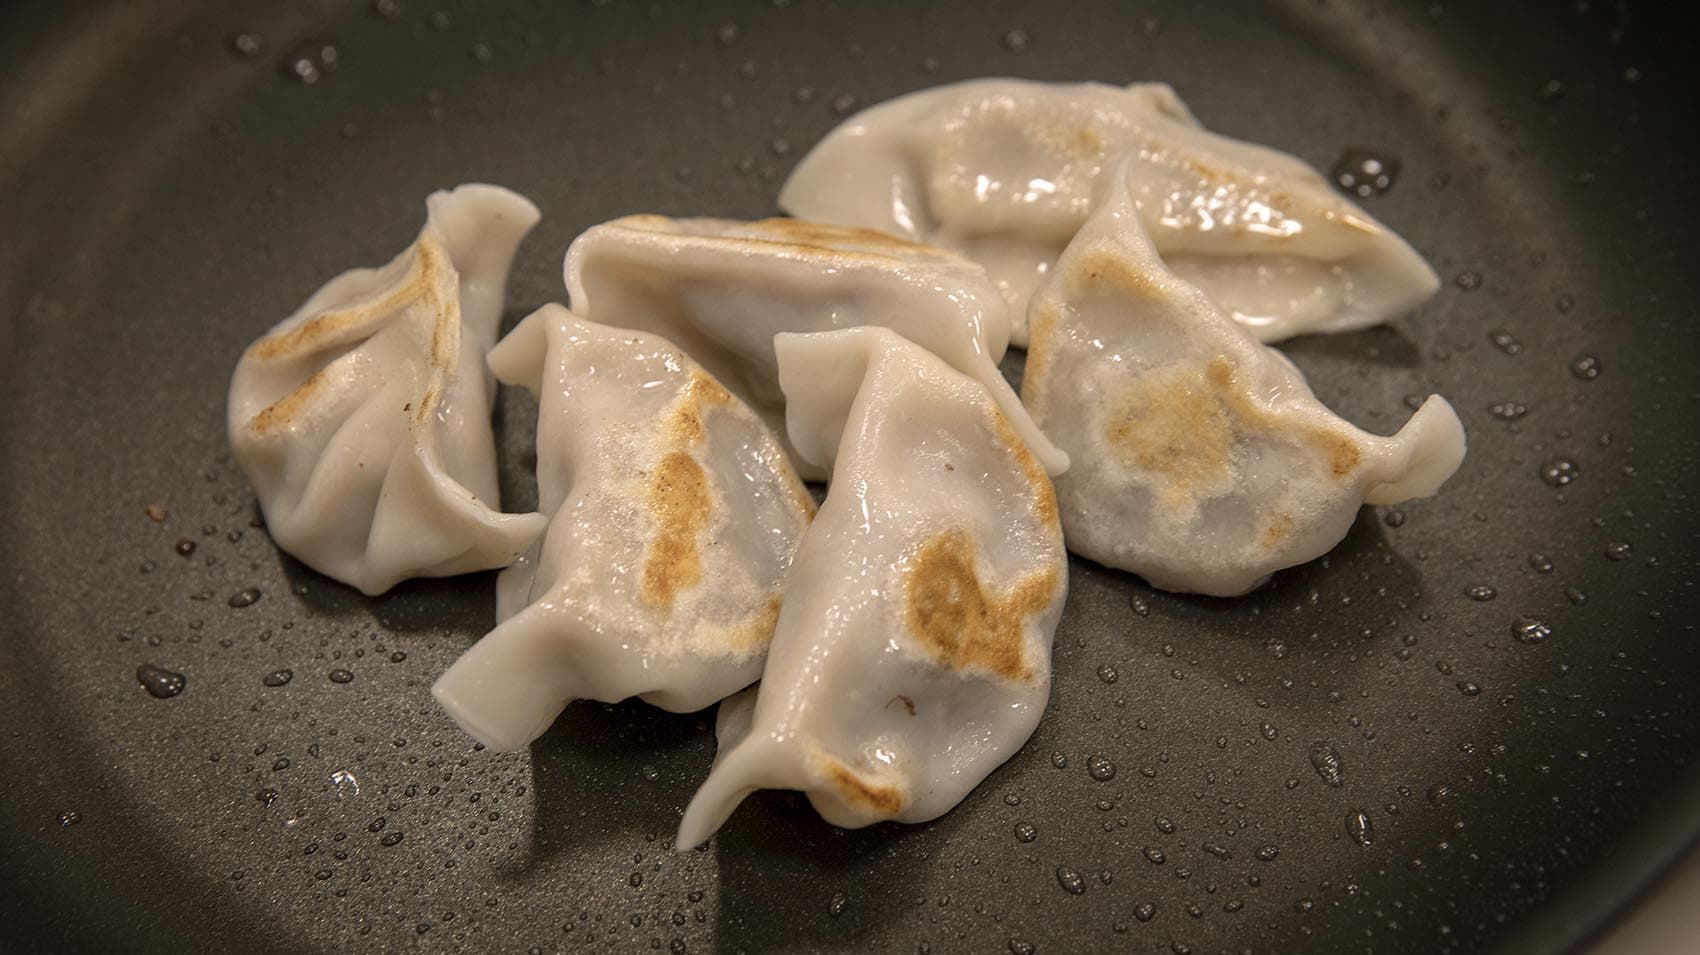 Billions of people around the world are celebrating the Lunar New Year. In China, one dish in particular is a staple of the celebration: pork dumplings. (Robin Lubbock/WBUR)